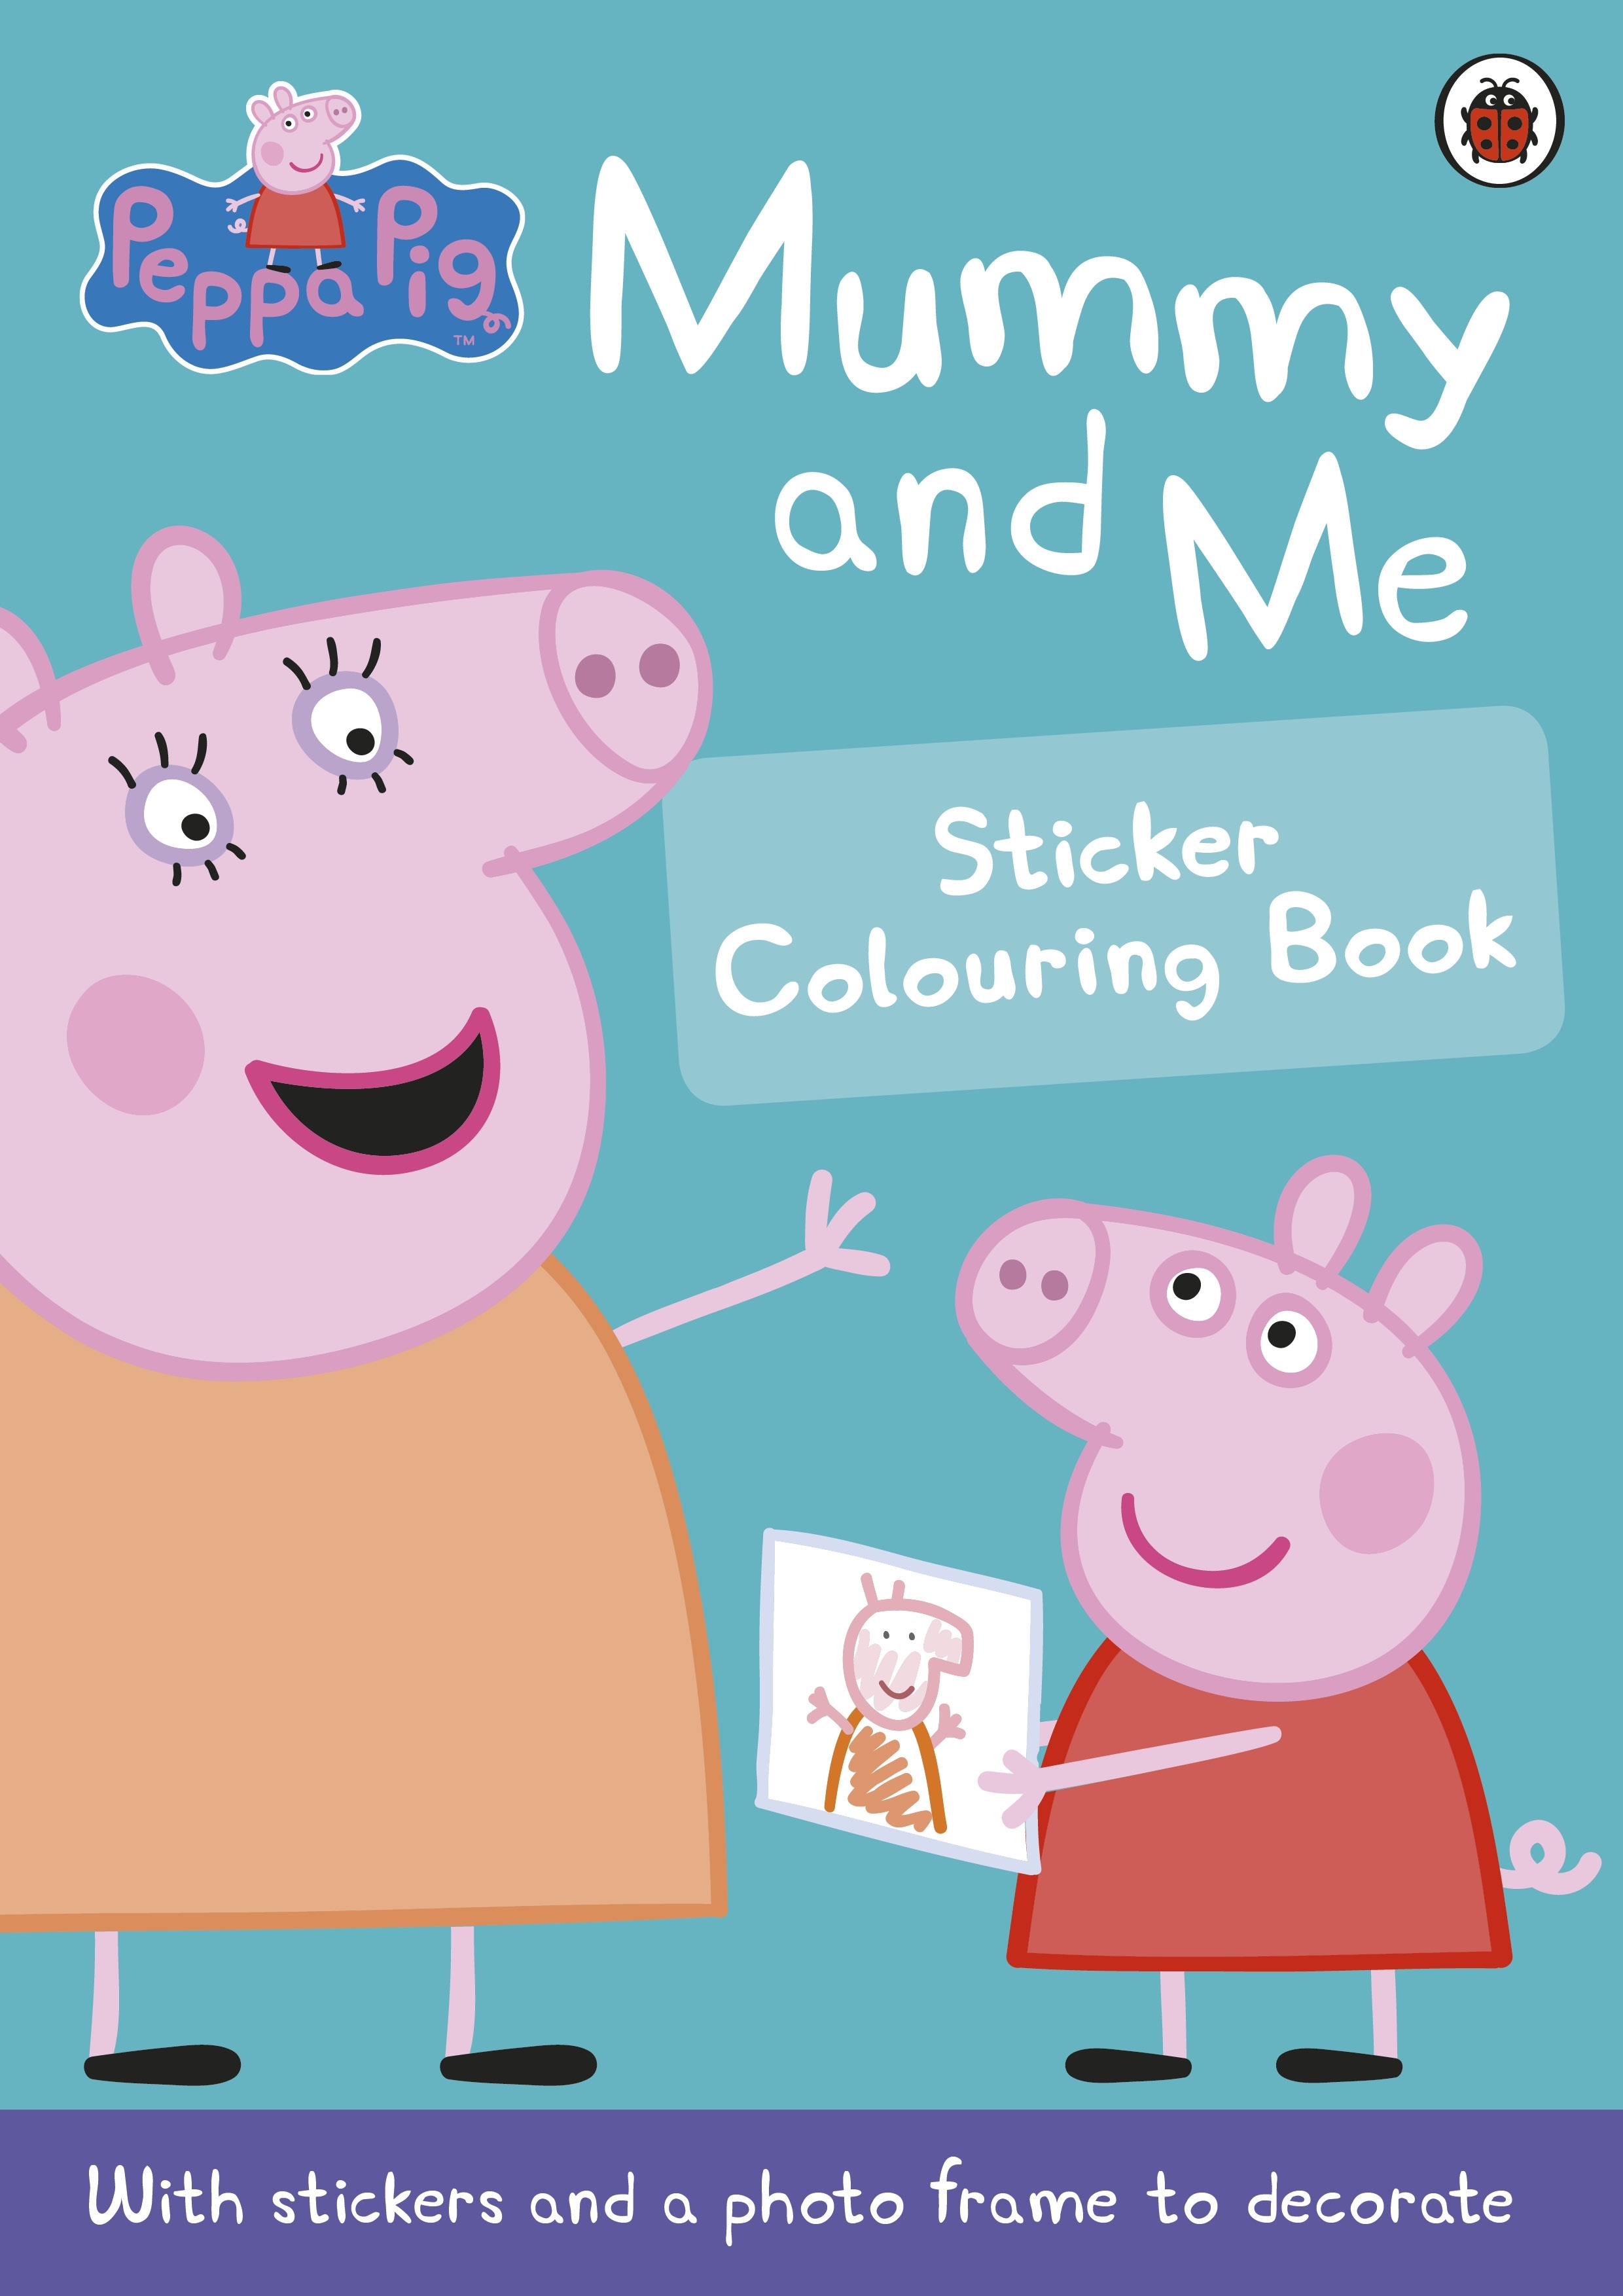 PEPPA PIG: MUMMY AND ME STICKER COLOURING BOOK ACTIVITY BOOK